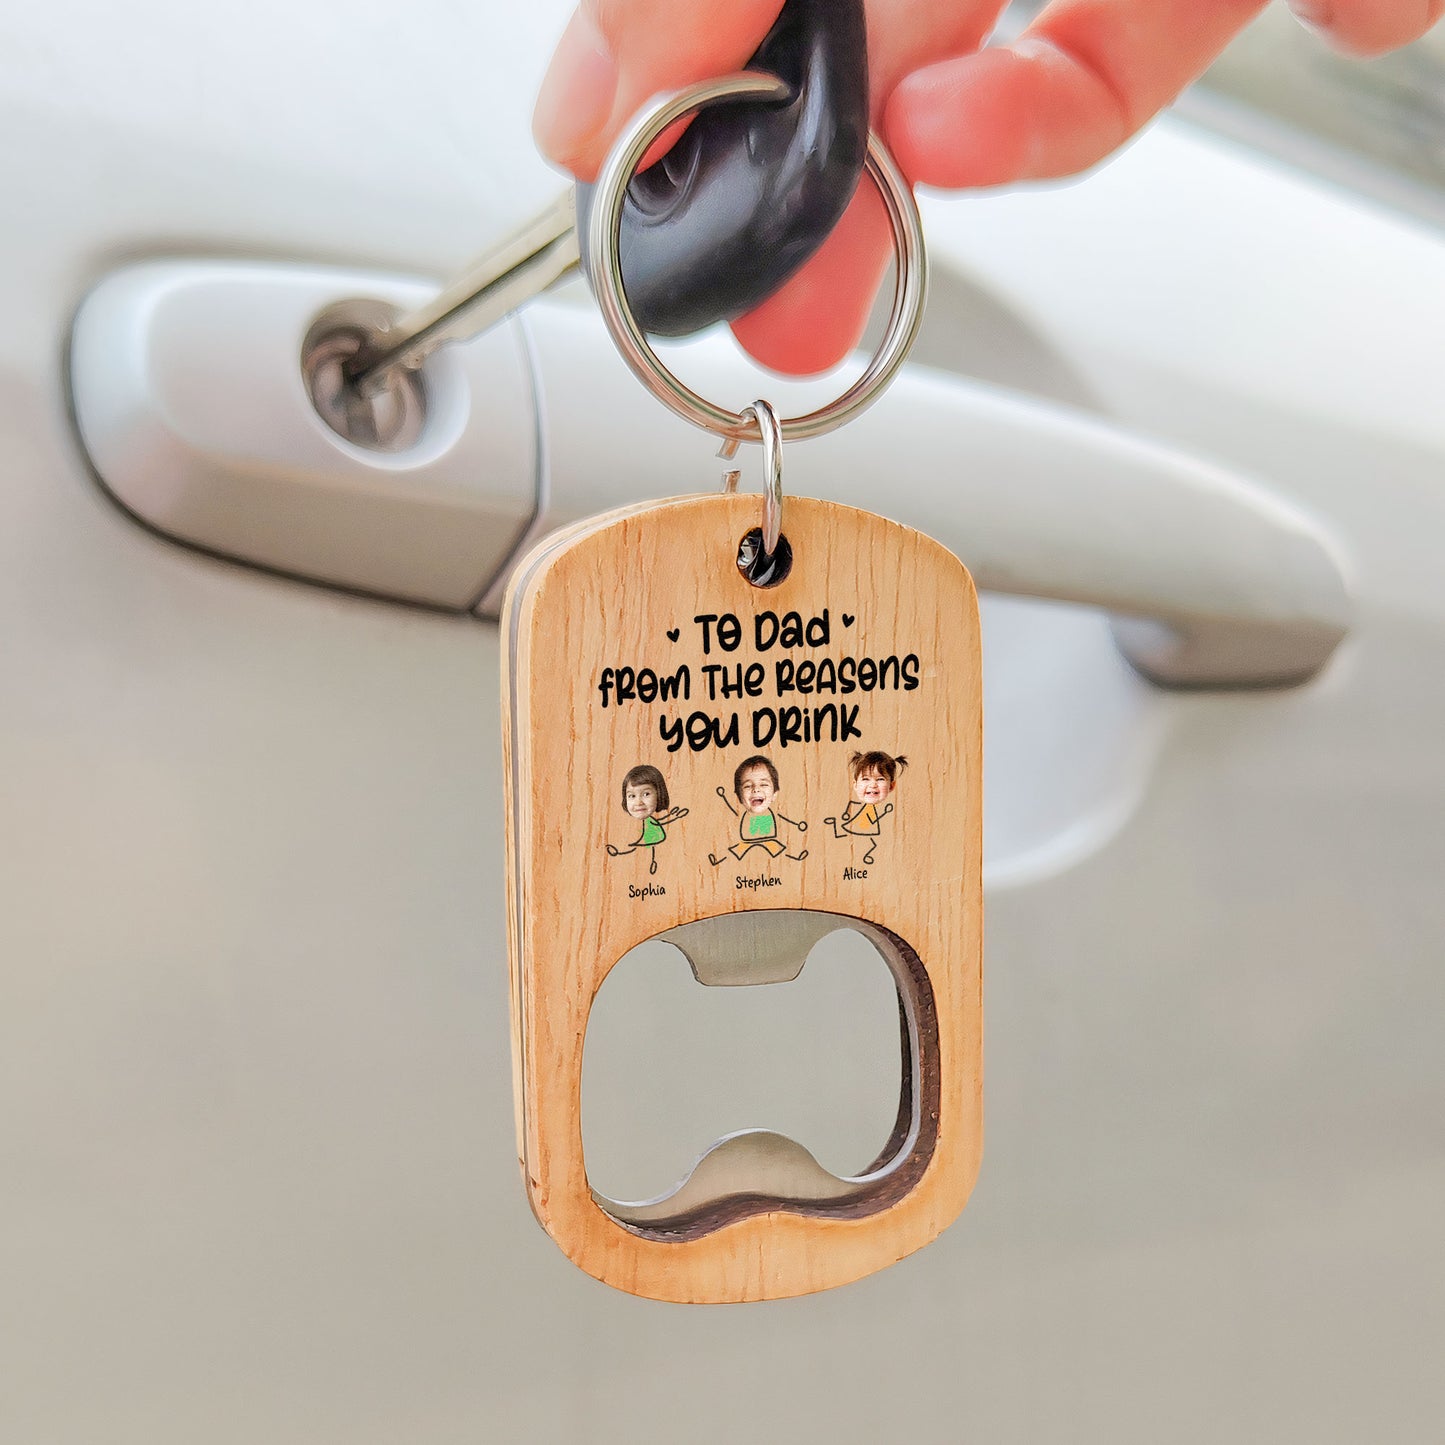 To Dad From The Reason You Drink - Personalized Bottle Opener Photo Keychain